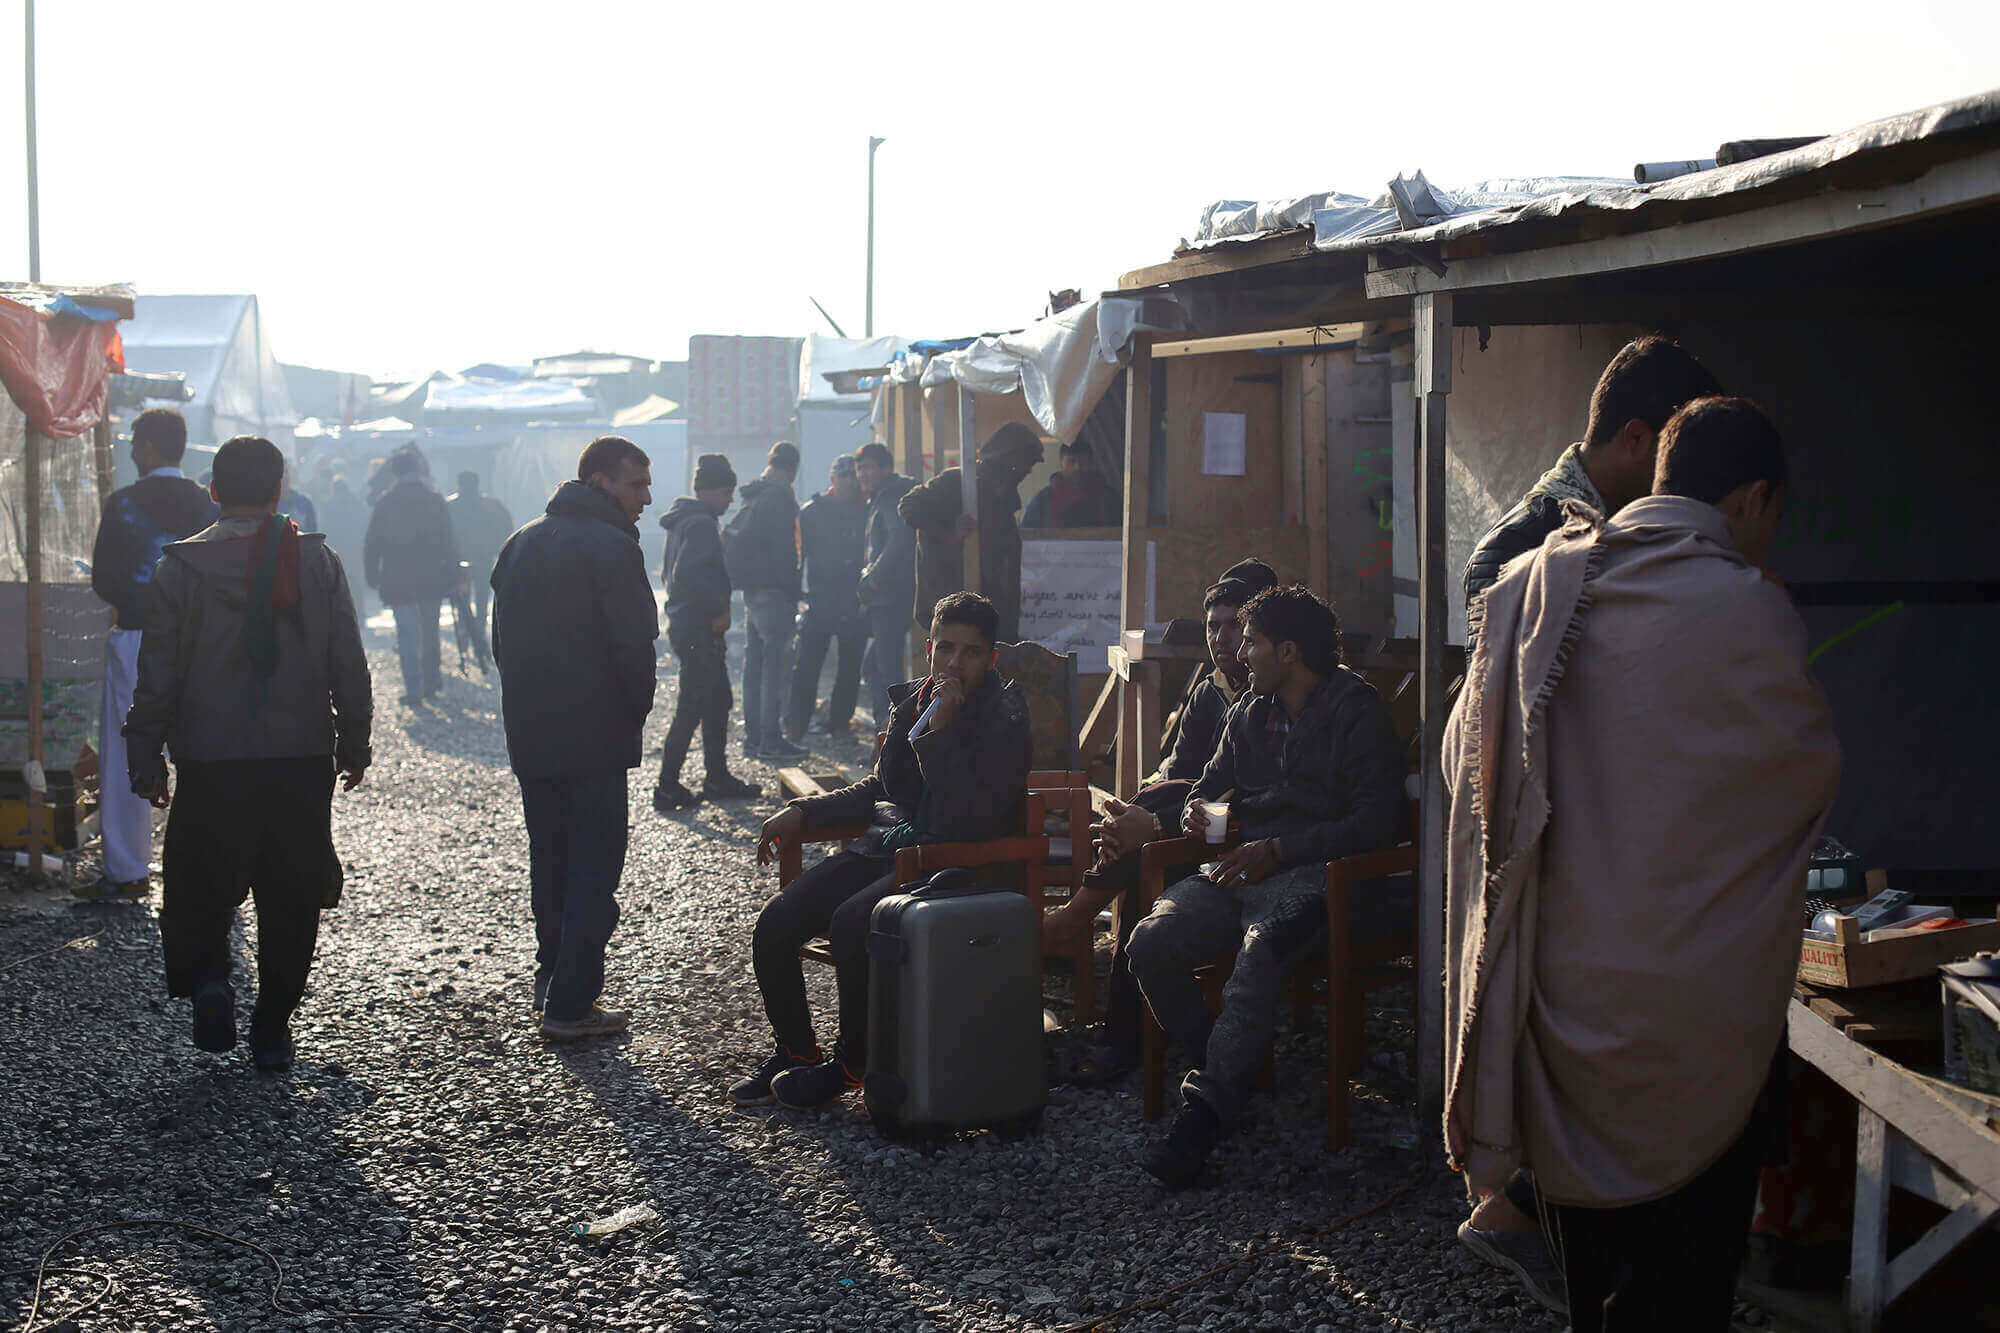 Image of migrants in French refugee camp